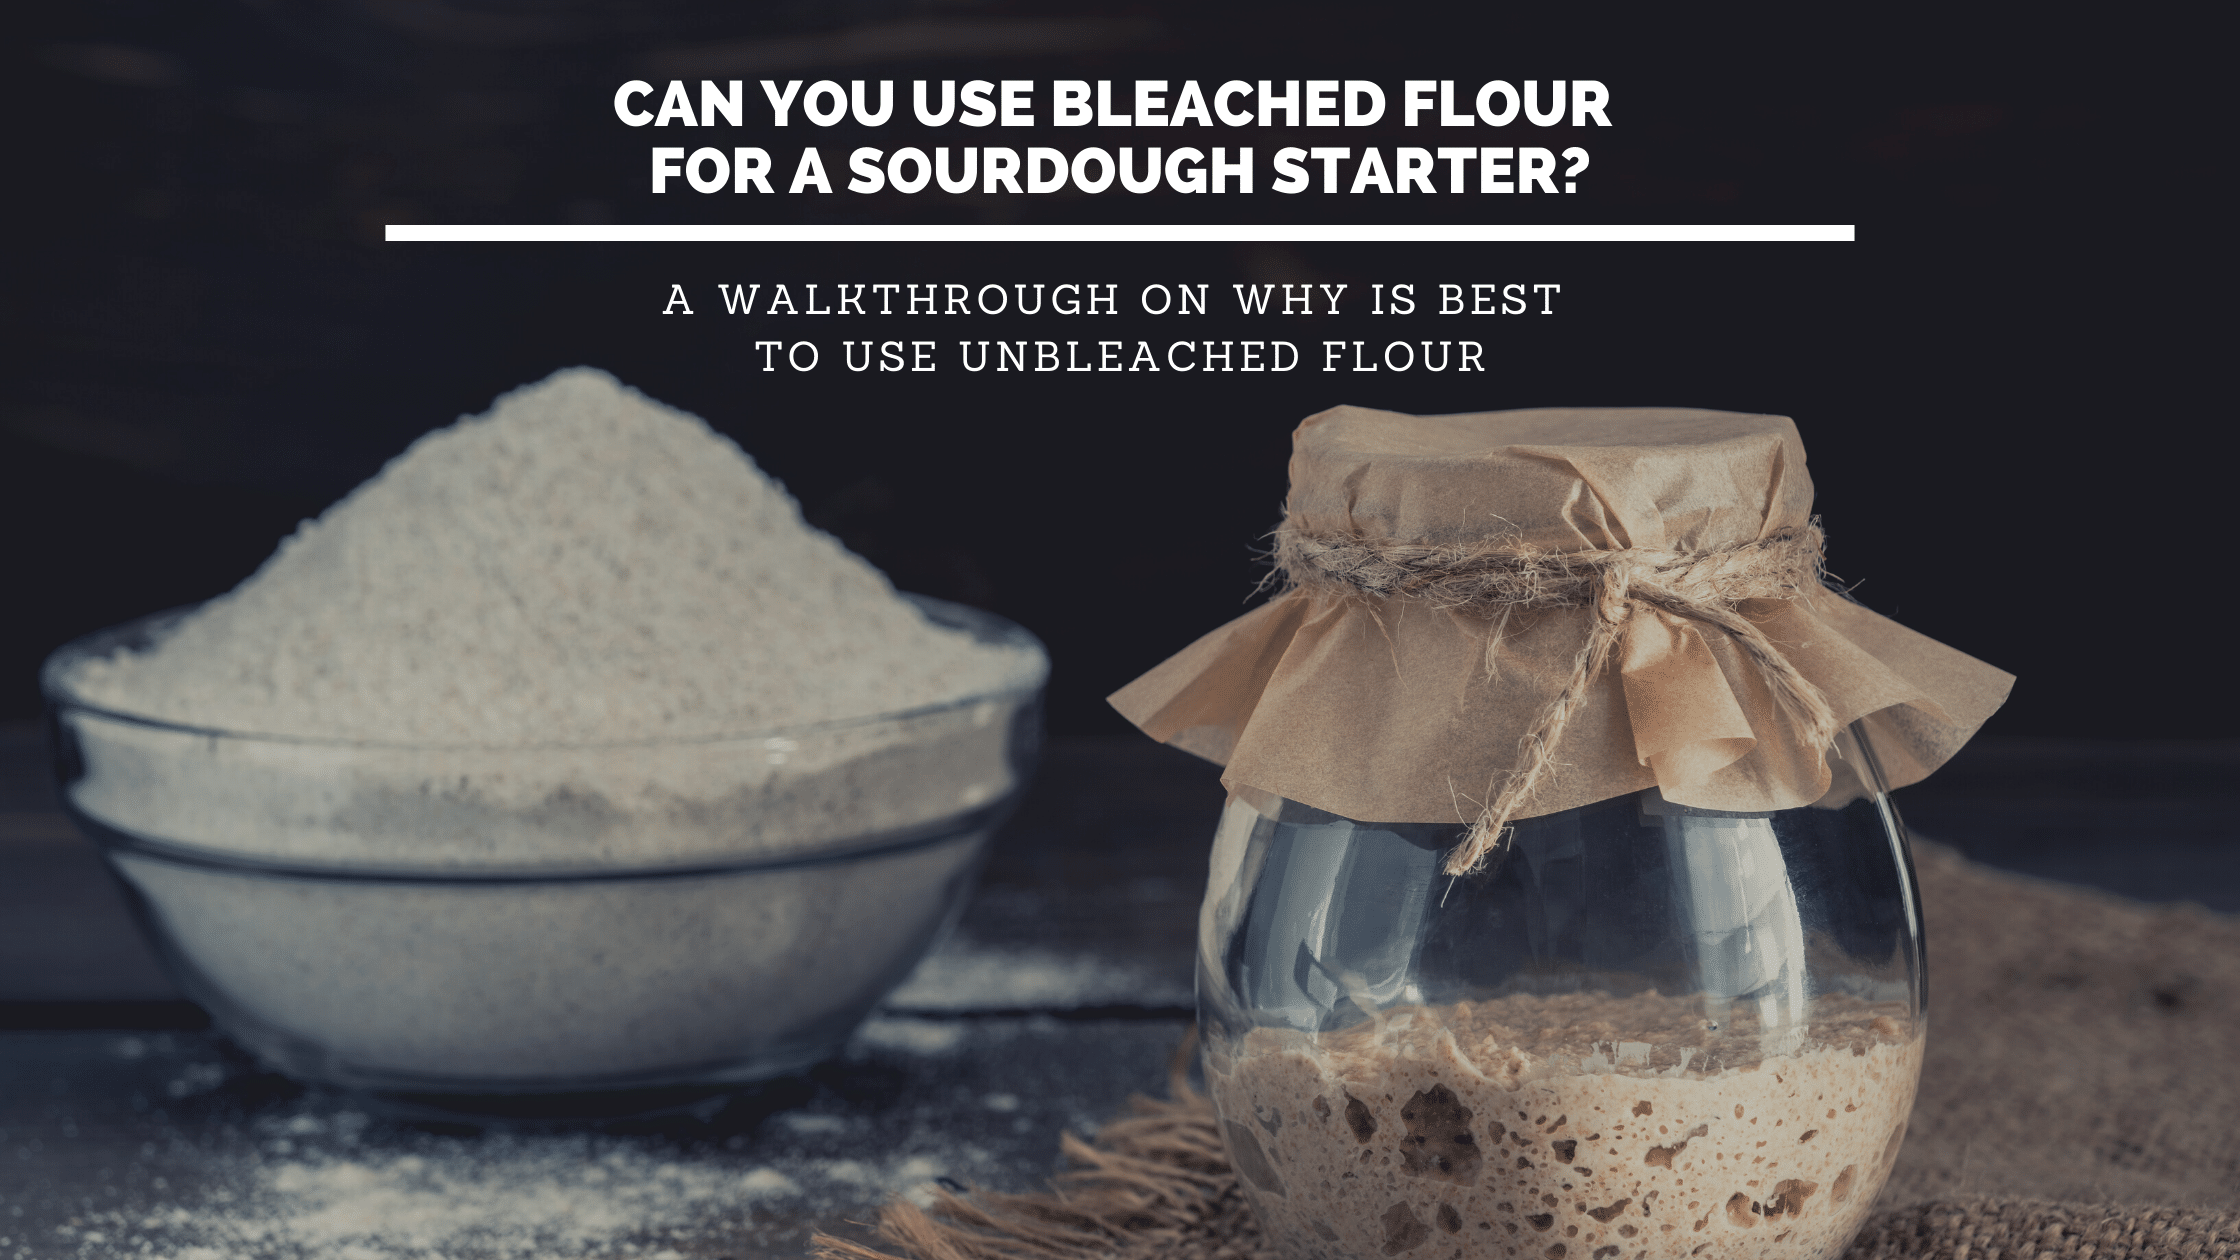 Can You Use Bleached Flour for Sourdough Starter? A Walkthrough to What You Need to Know